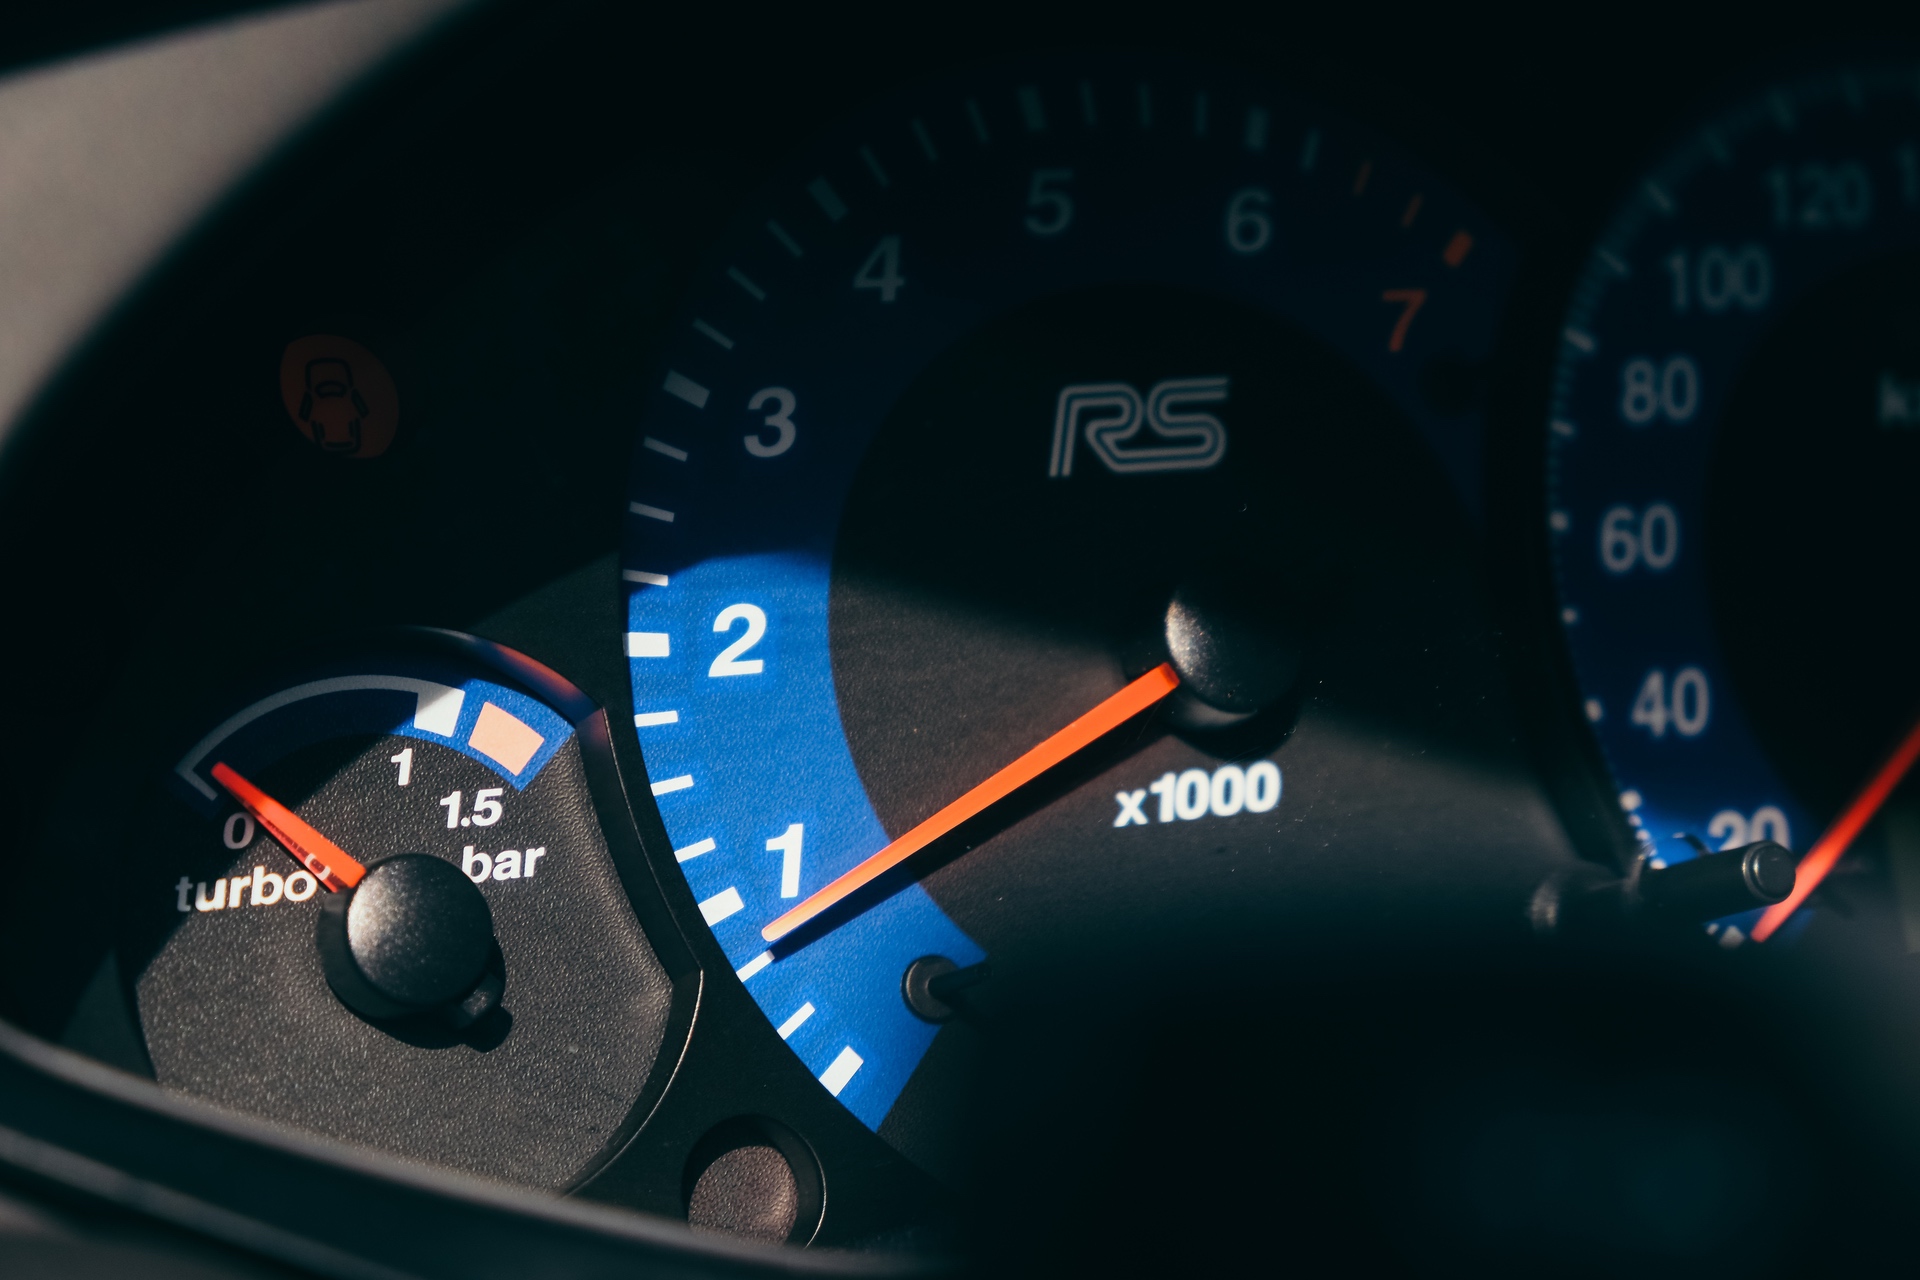 Ford Focus RS instrument cluster with turbo boost gauge